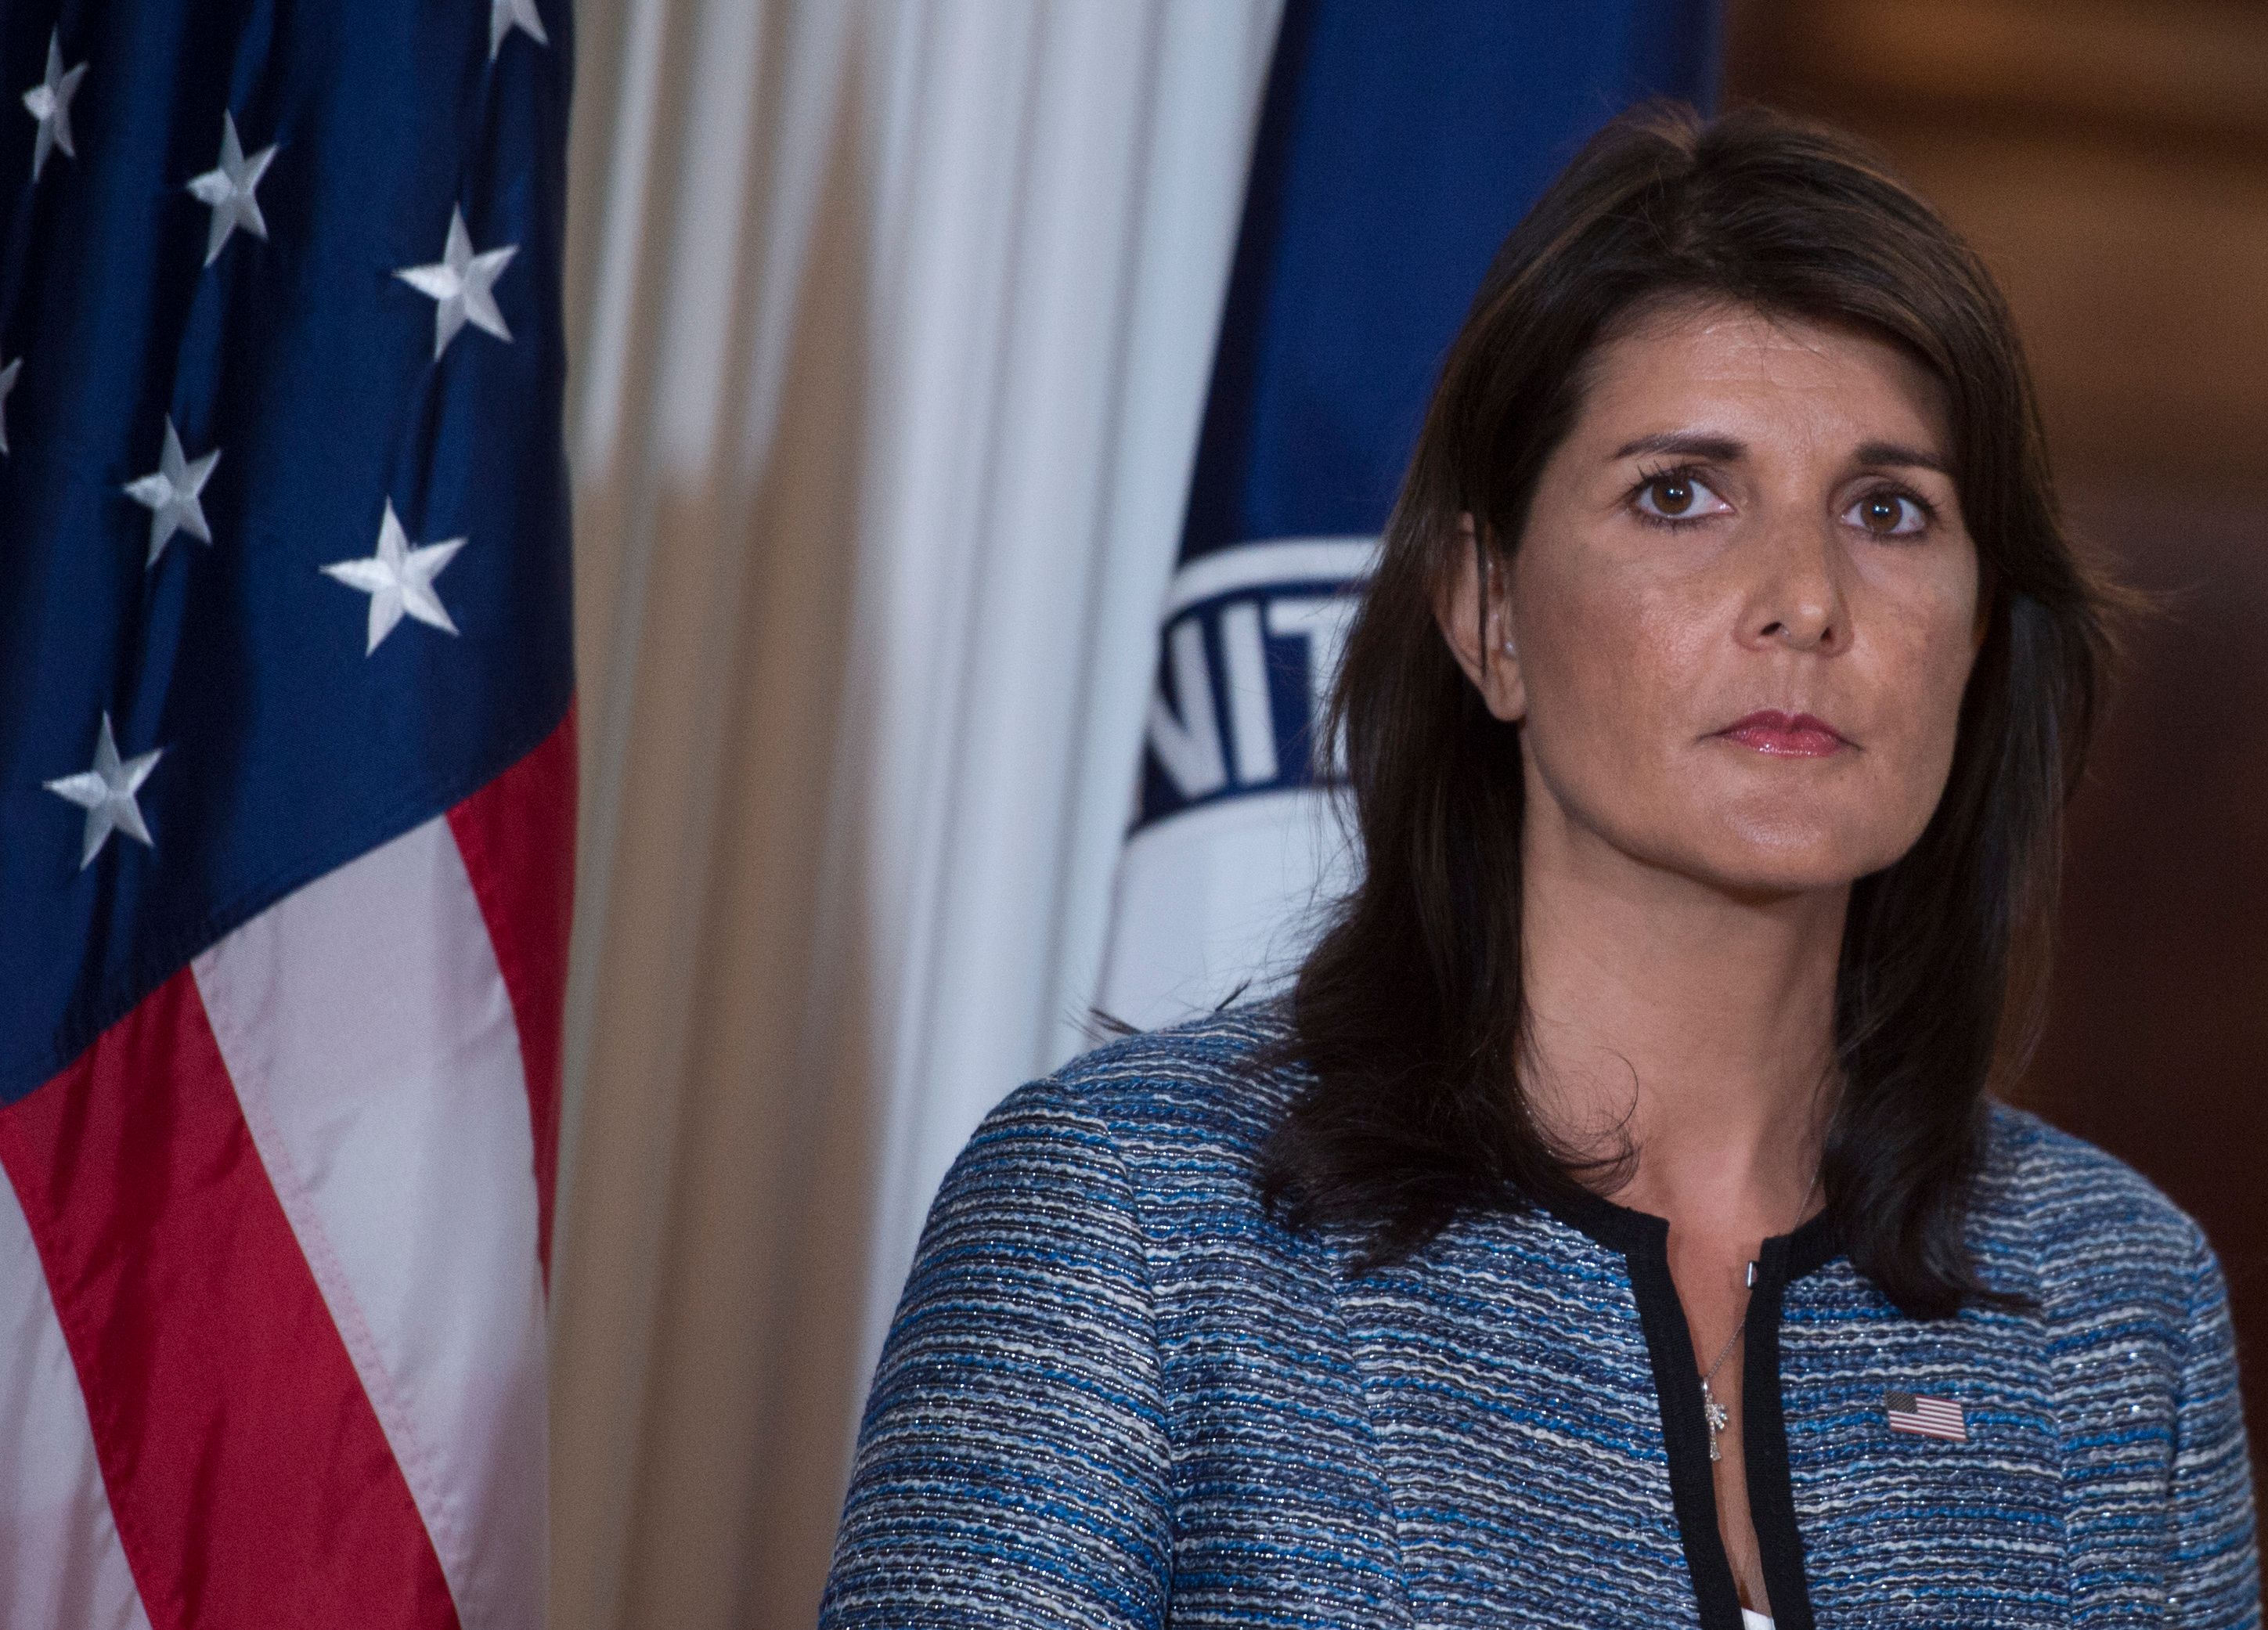 Nikki Haley speaks at the Department of State